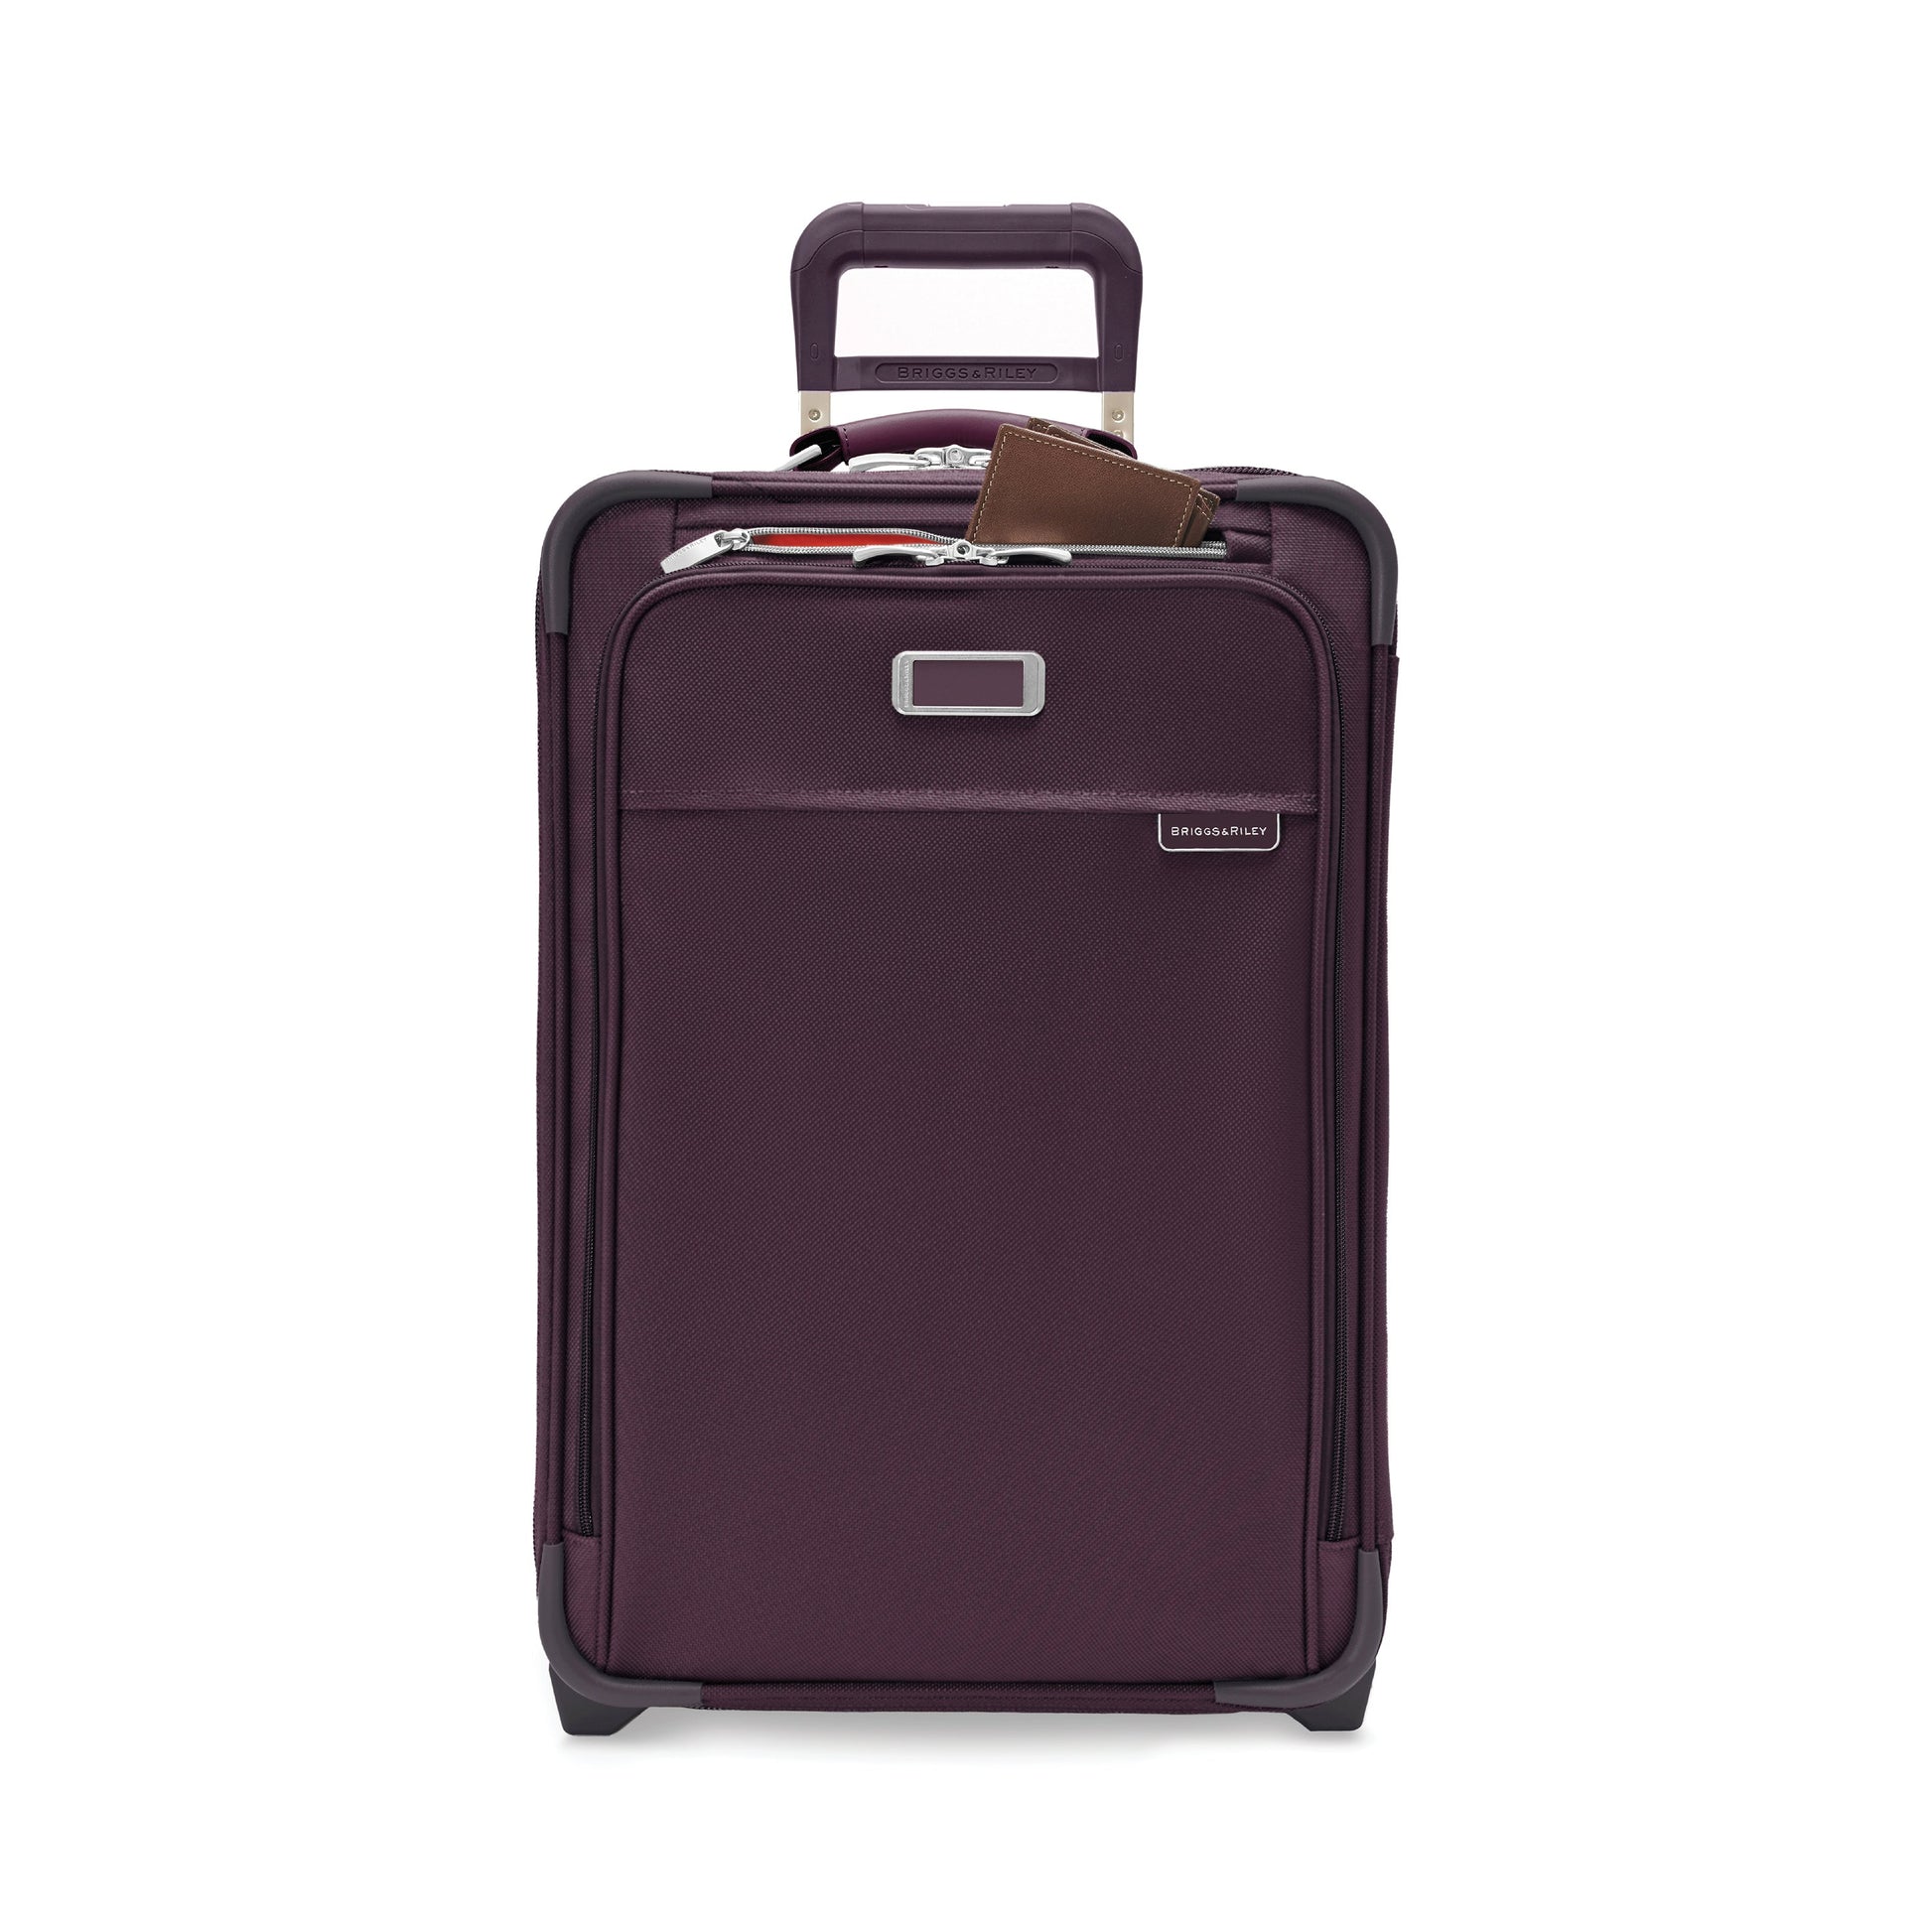 Briggs & Riley NEW Baseline Essential 2-Wheel Carry-On Luggage - Limited Edition: Plum